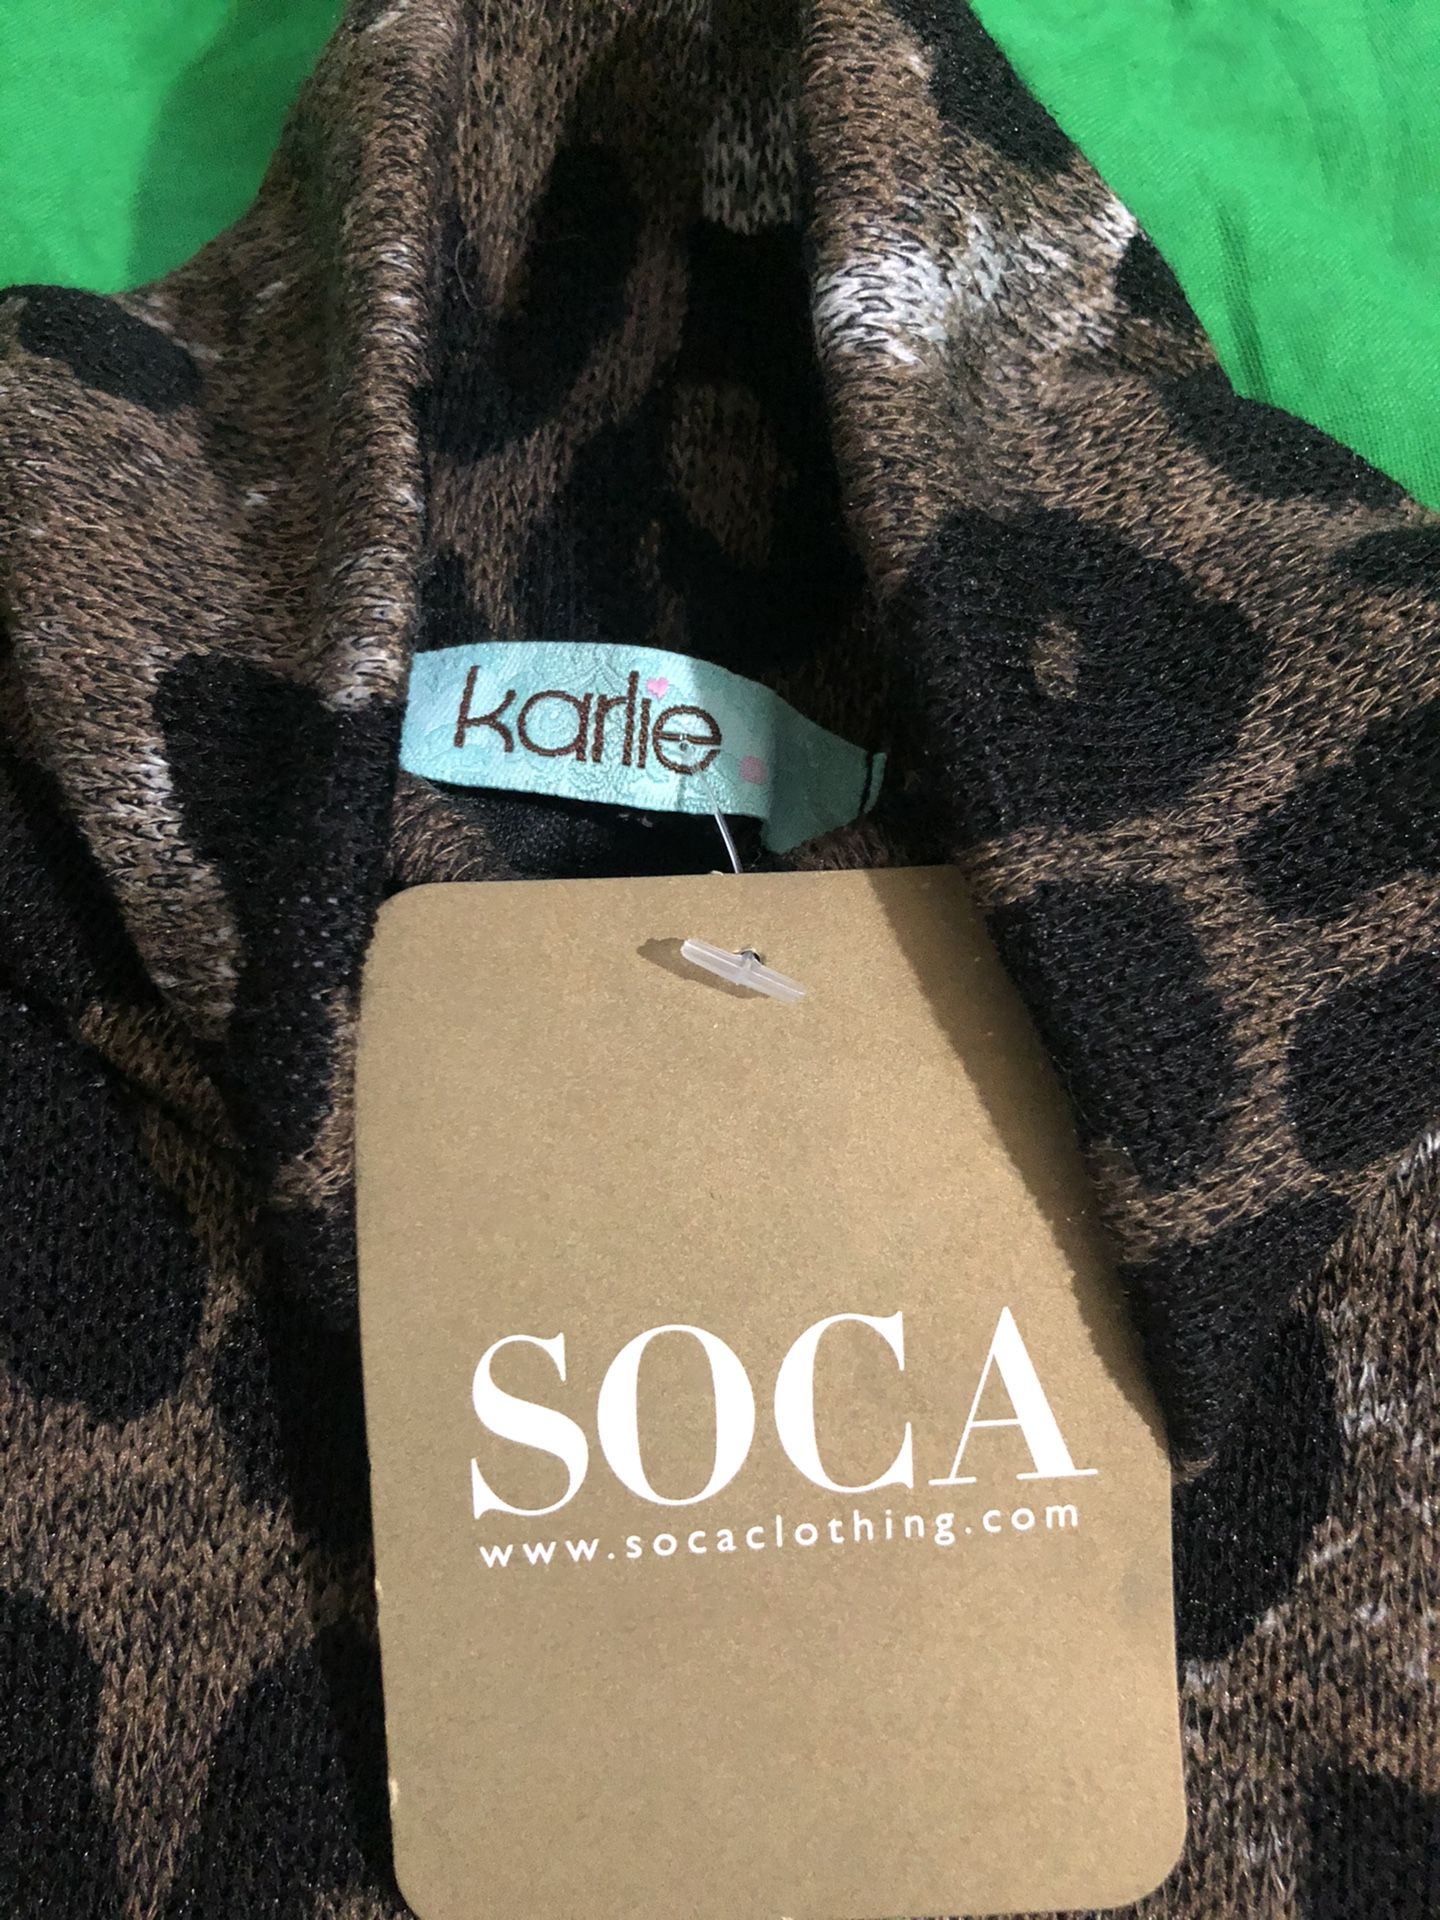 Karlie by Soca long sleeve dress brand new with tags